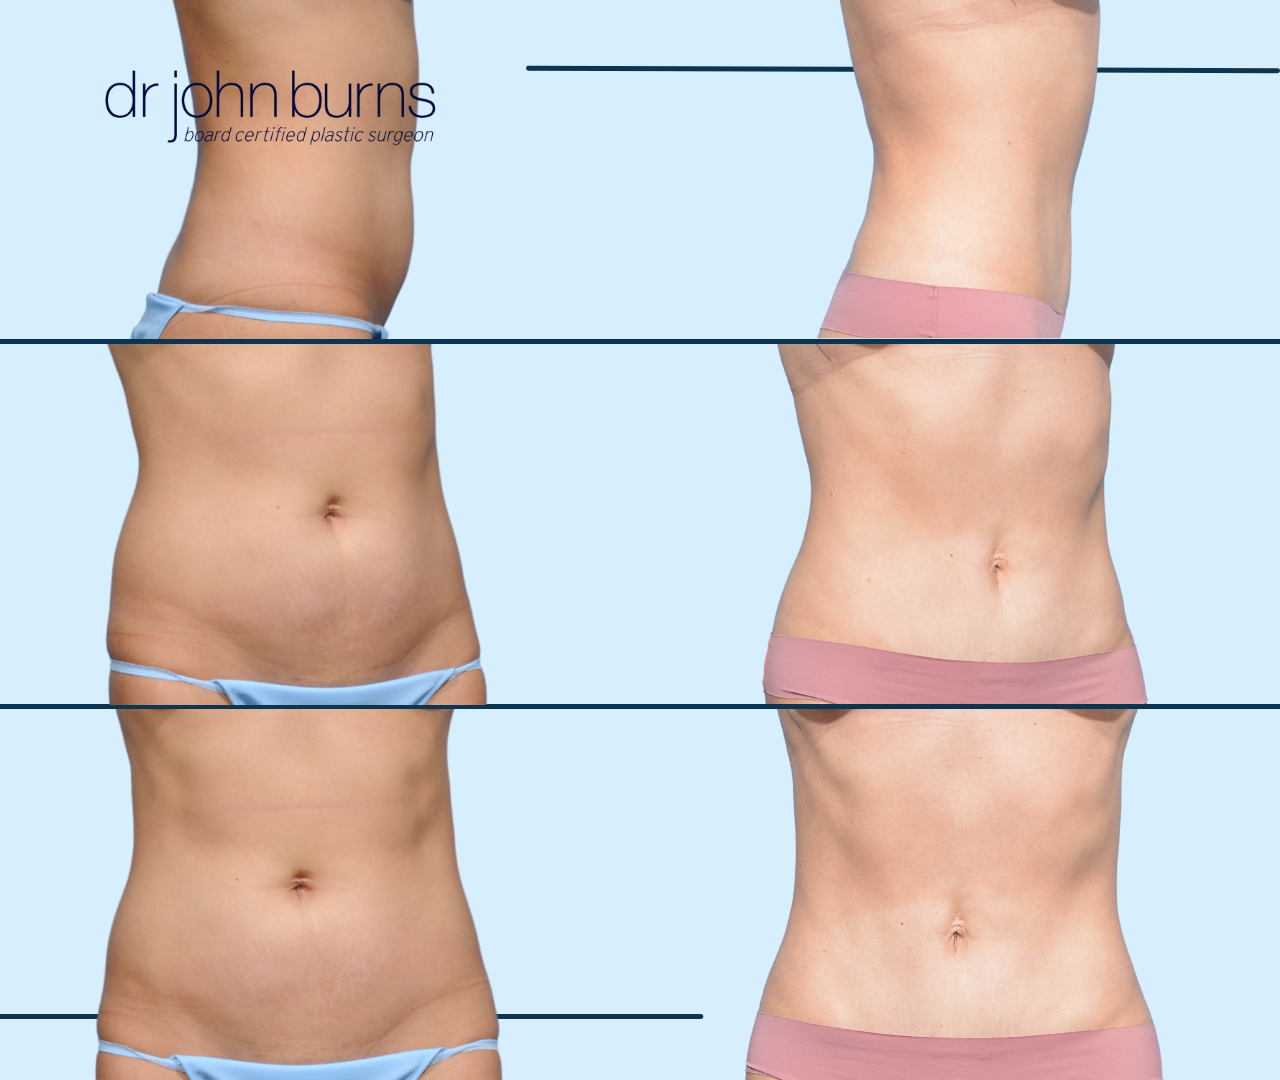 Case 17- Before and After Tiny Tummy Tuck with Umbilical Float and Ab Etching by Dr. John Burns